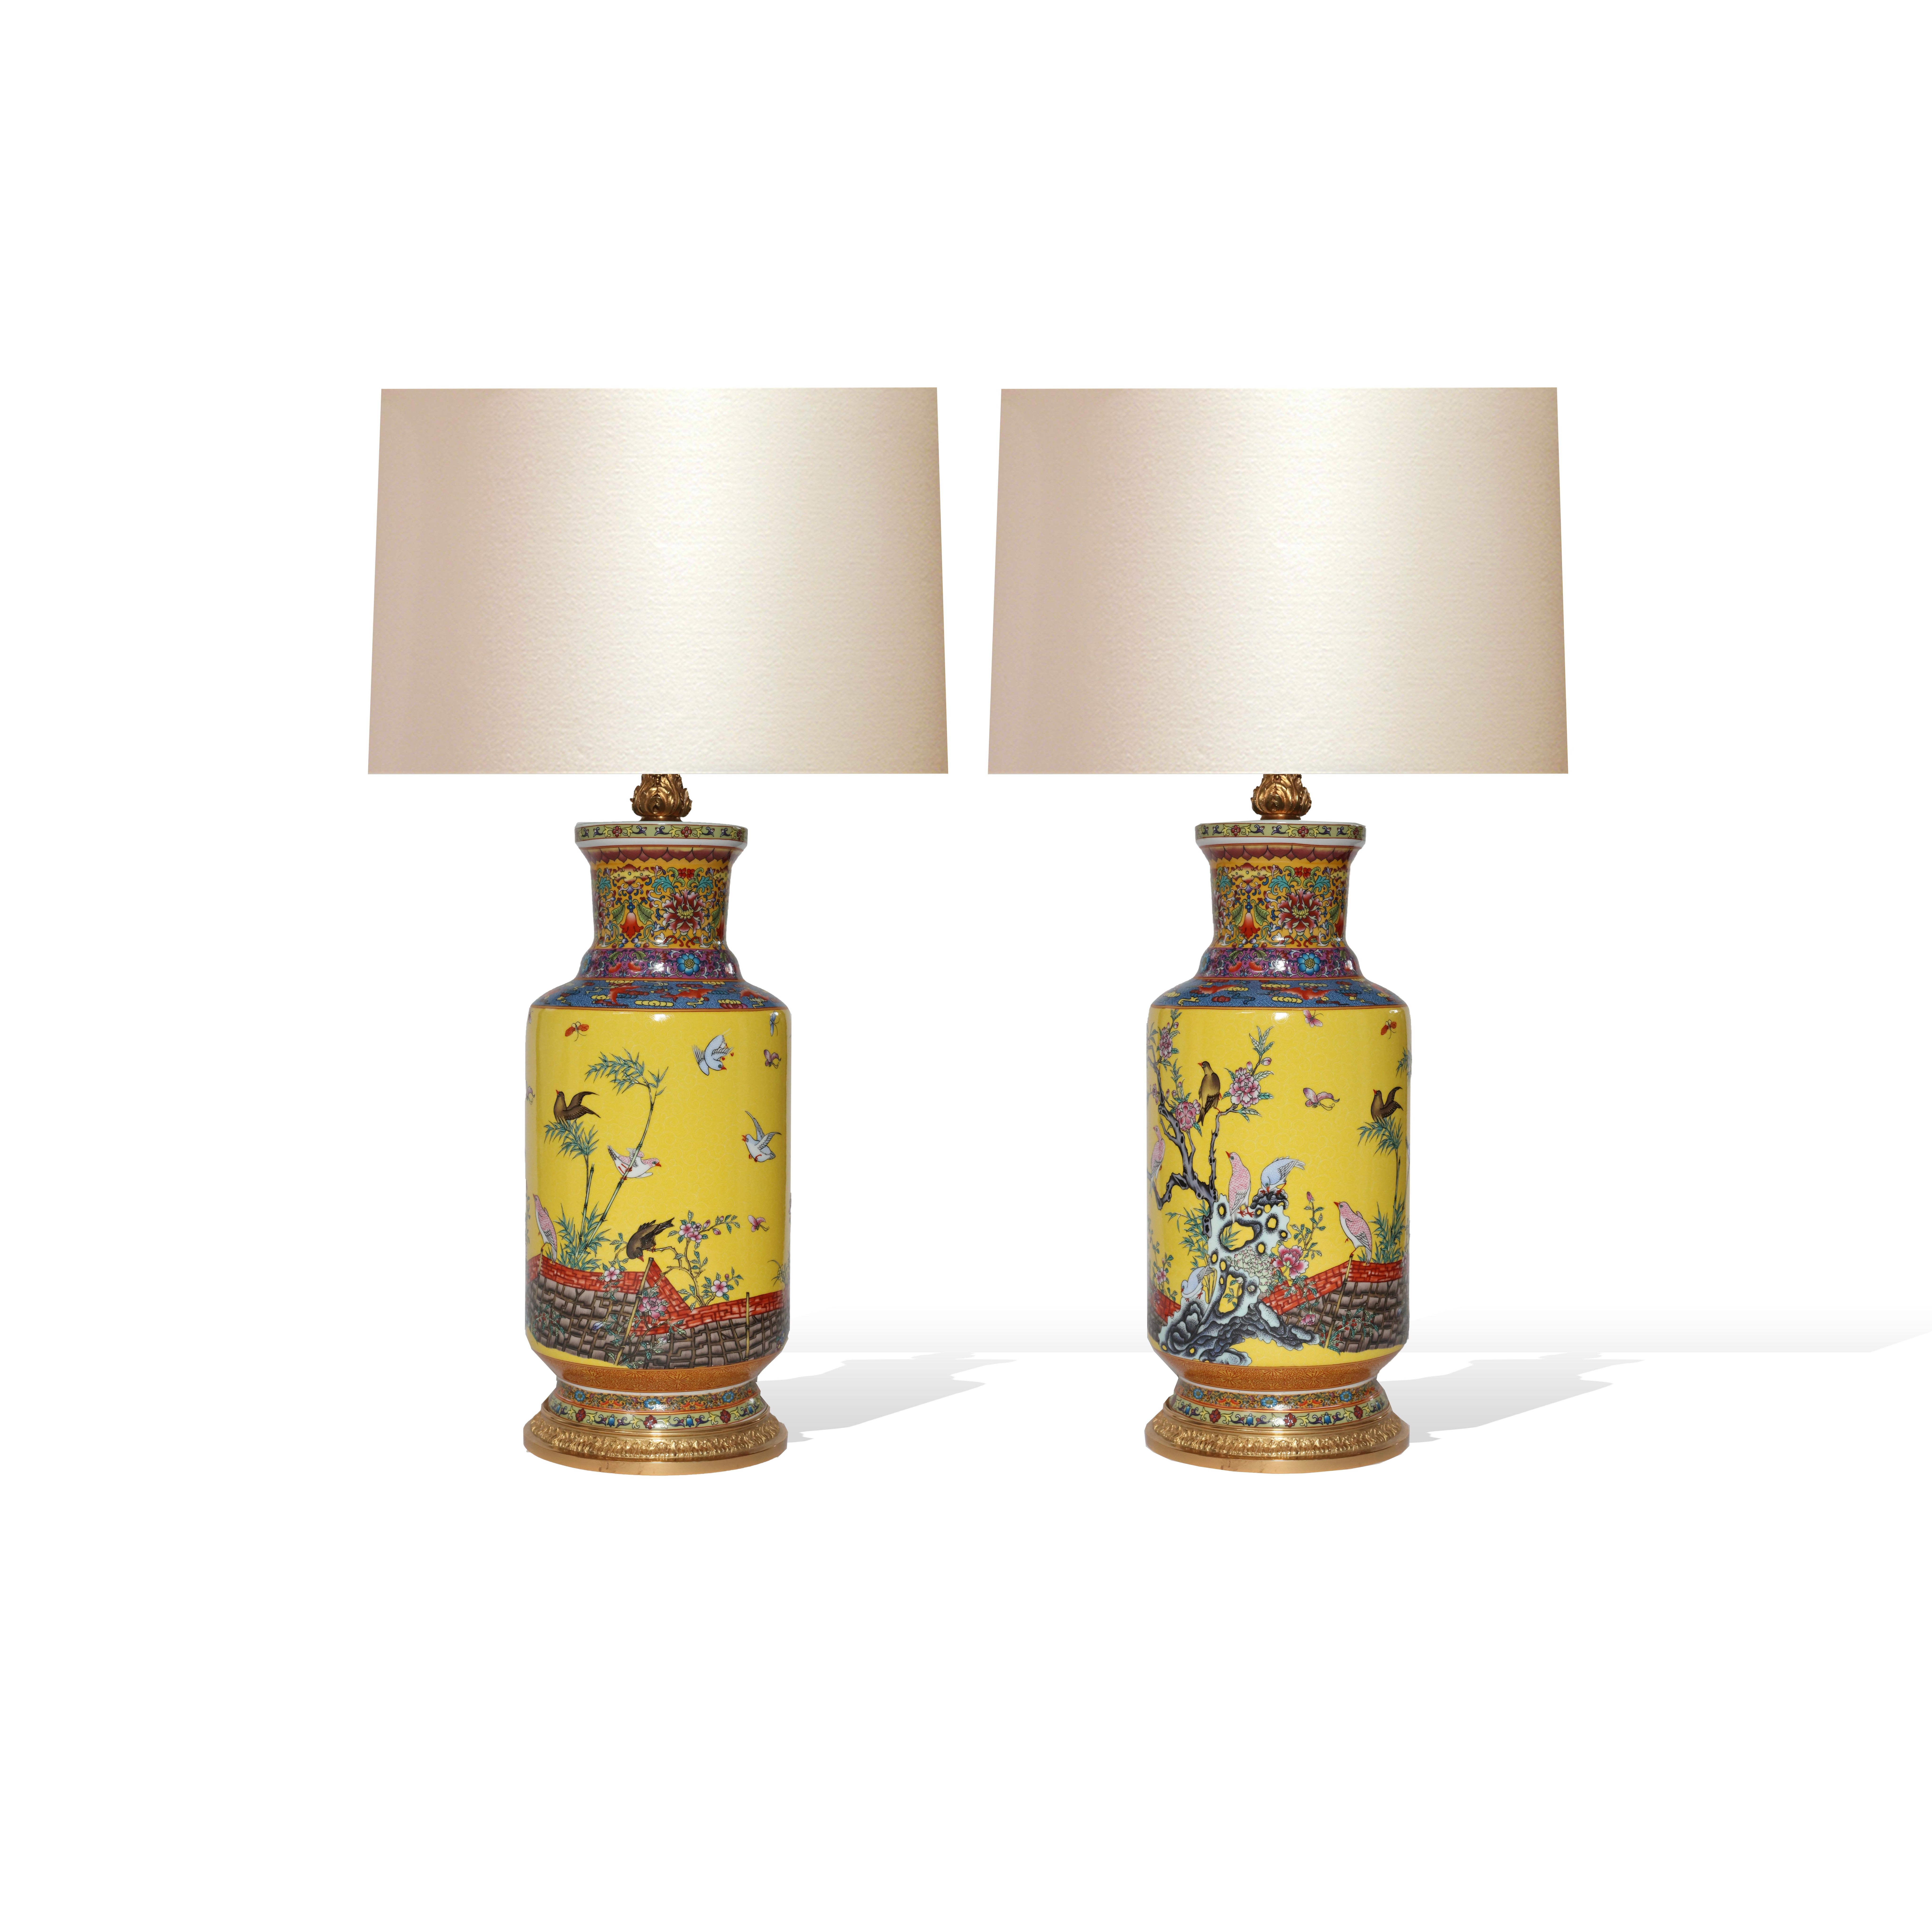 Pair of yellow ground famille verte porcelain lamps with ( ) decoration,
Gilt brass bases, each lamp installed two large base sockets,
150 w total, lamp shade are not included,
To the top of the porcelain vase 17.5 inch.